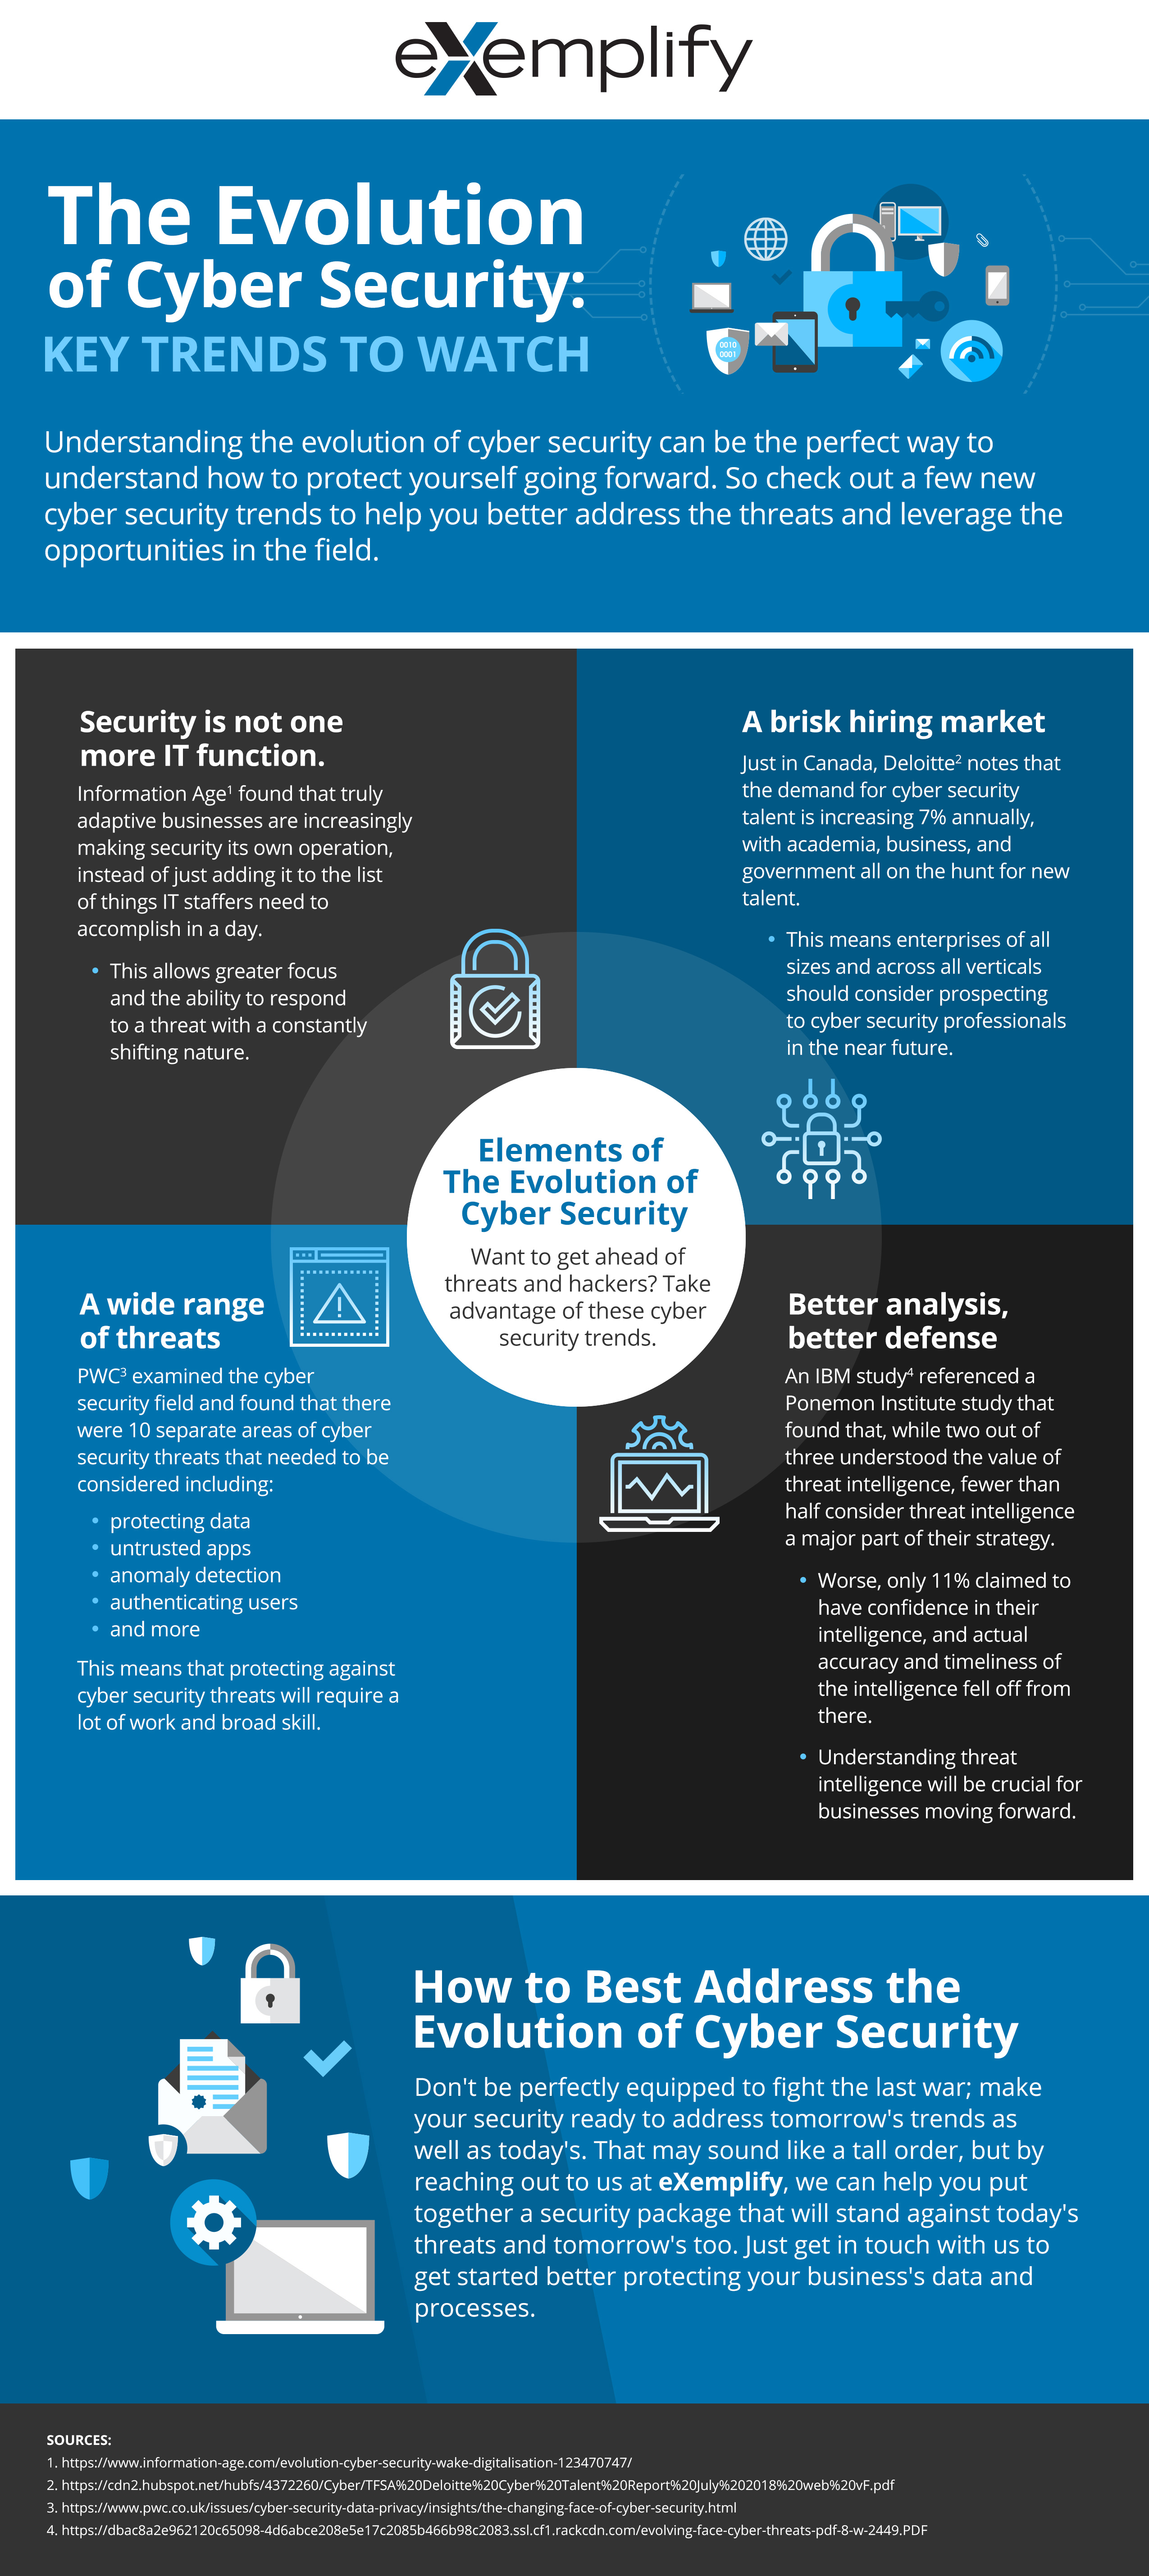 The Evolution of Cyber Security: Key Trends to Watch